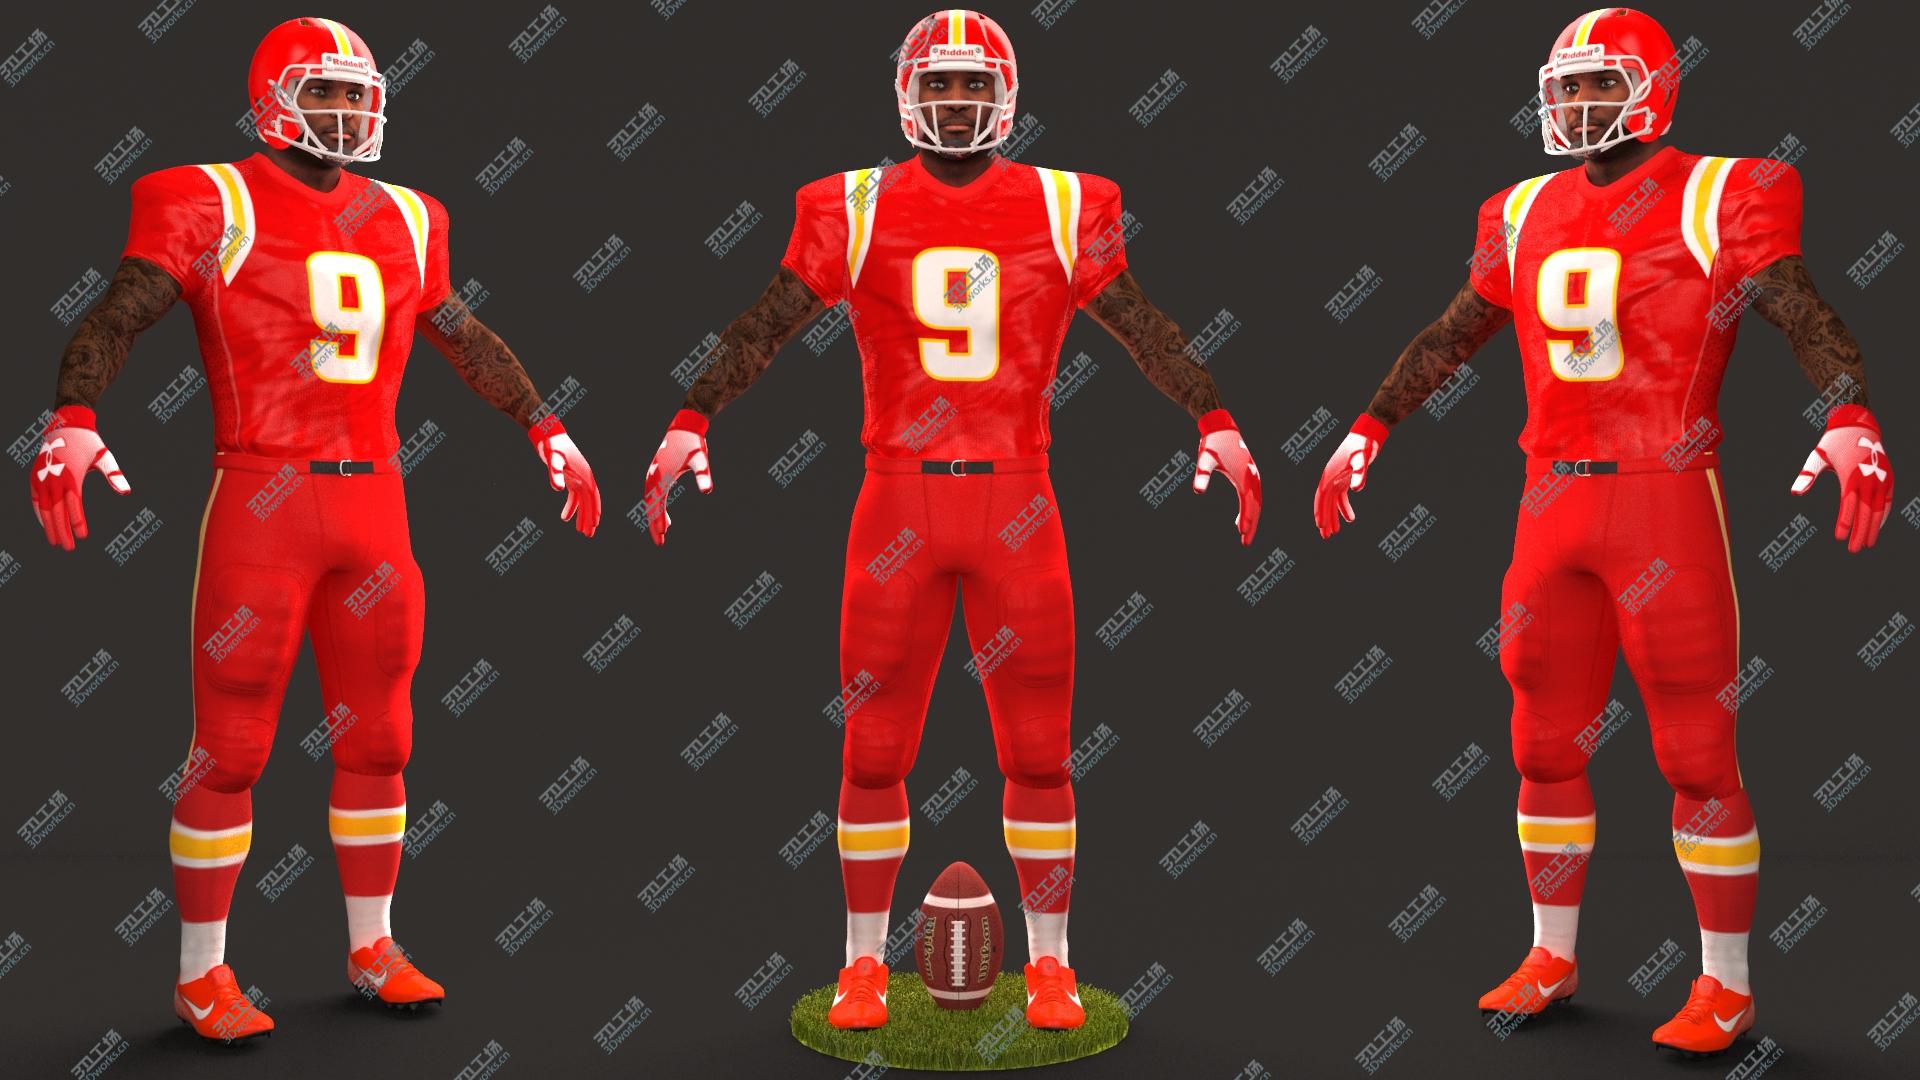 images/goods_img/20210313/American Football Players 2020 PBR Pack model/2.jpg